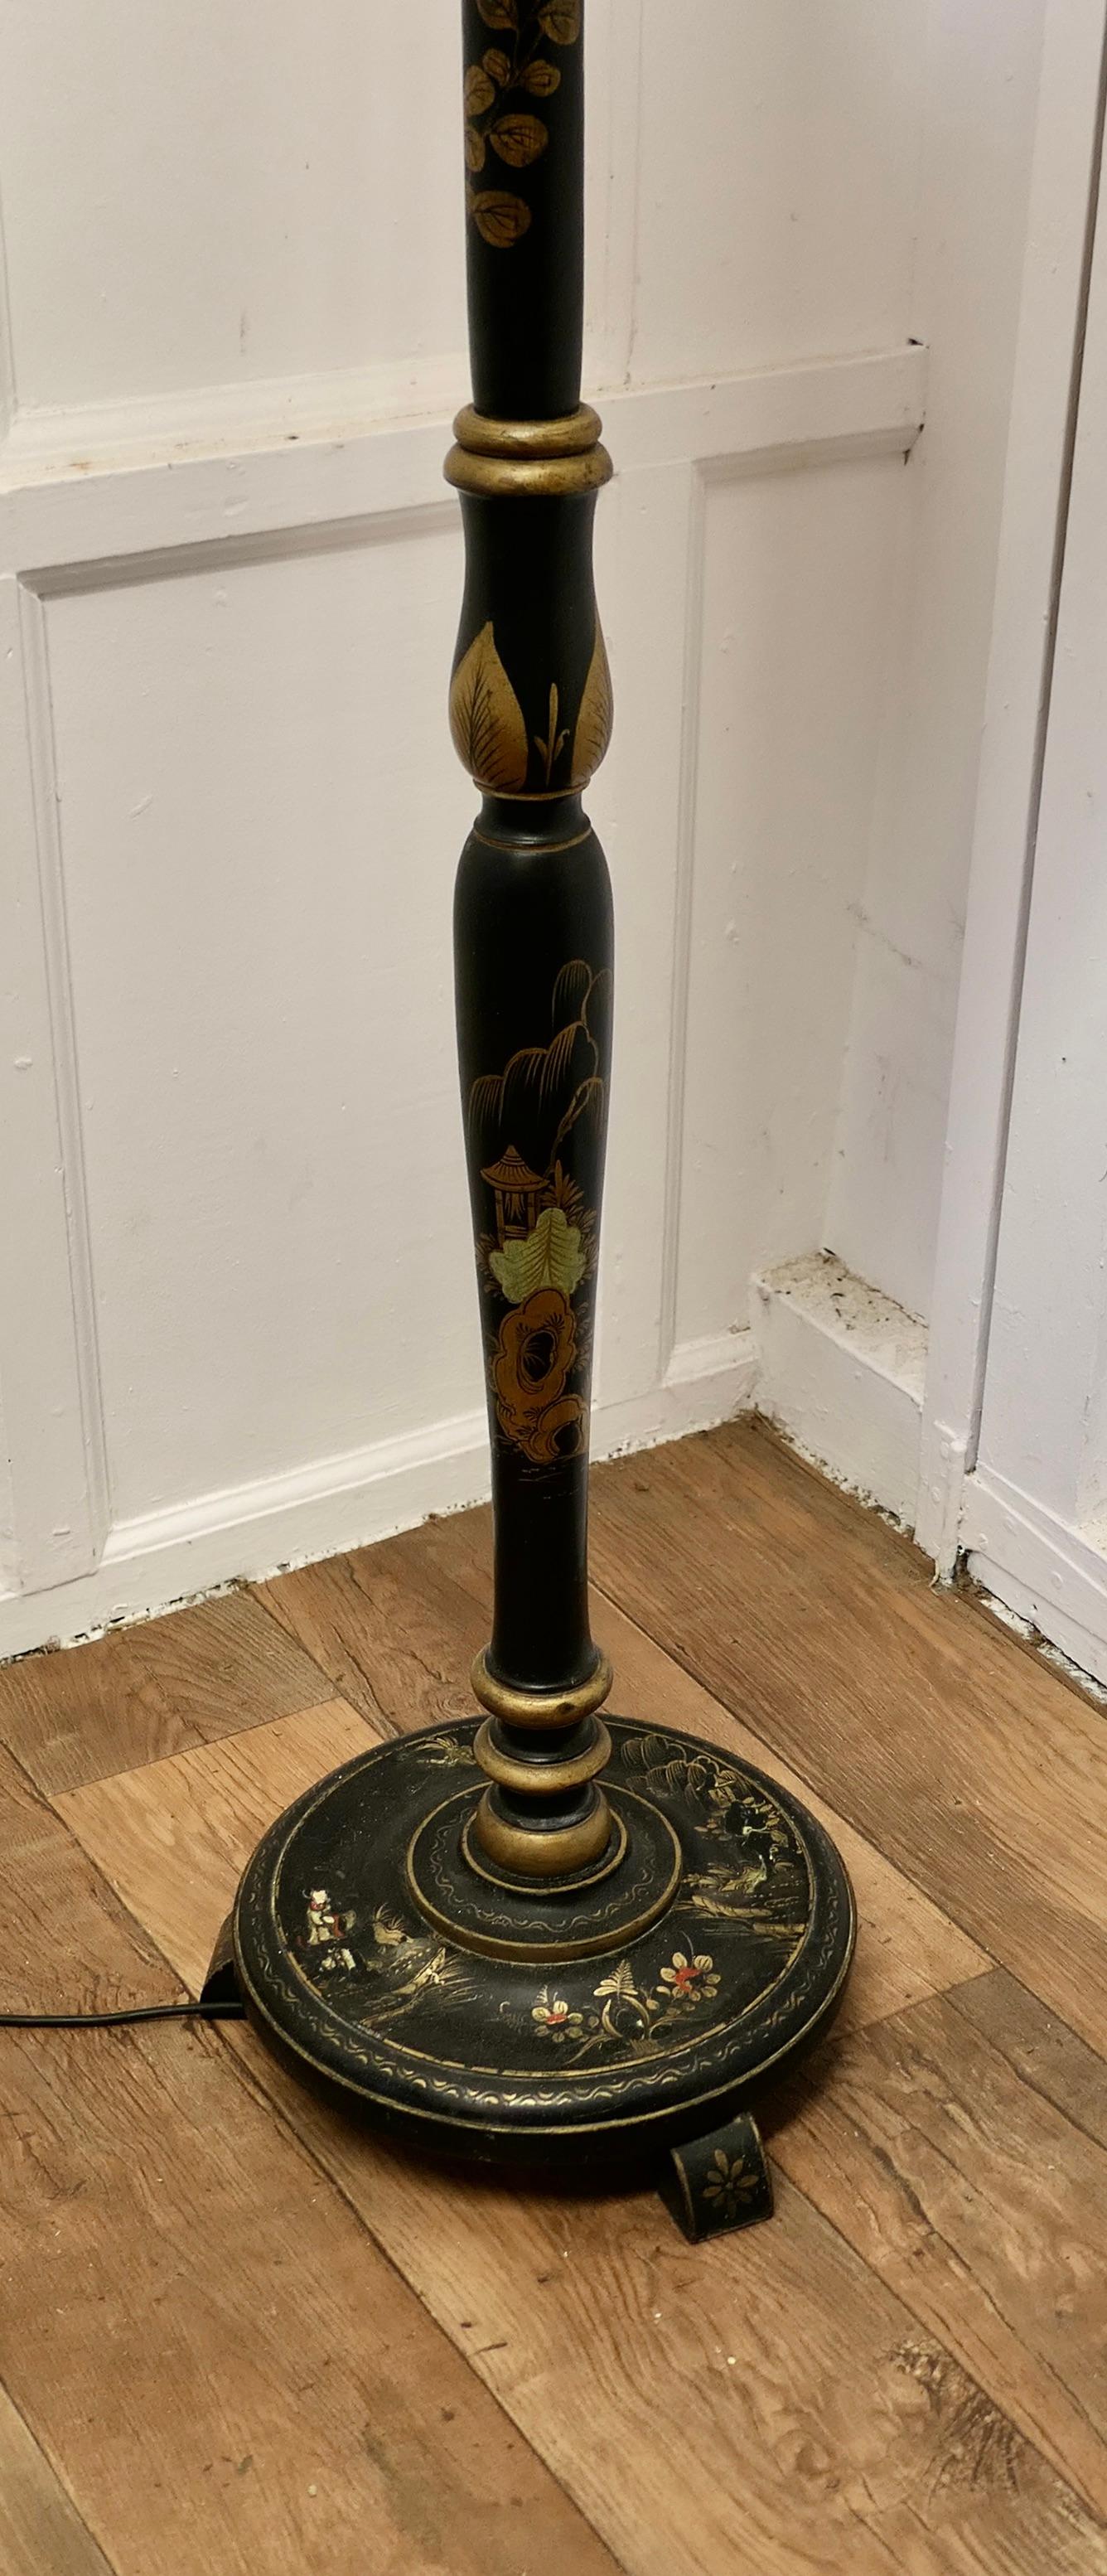 A Black Lacquer and Gold Decorated Standard Lamp    For Sale 2